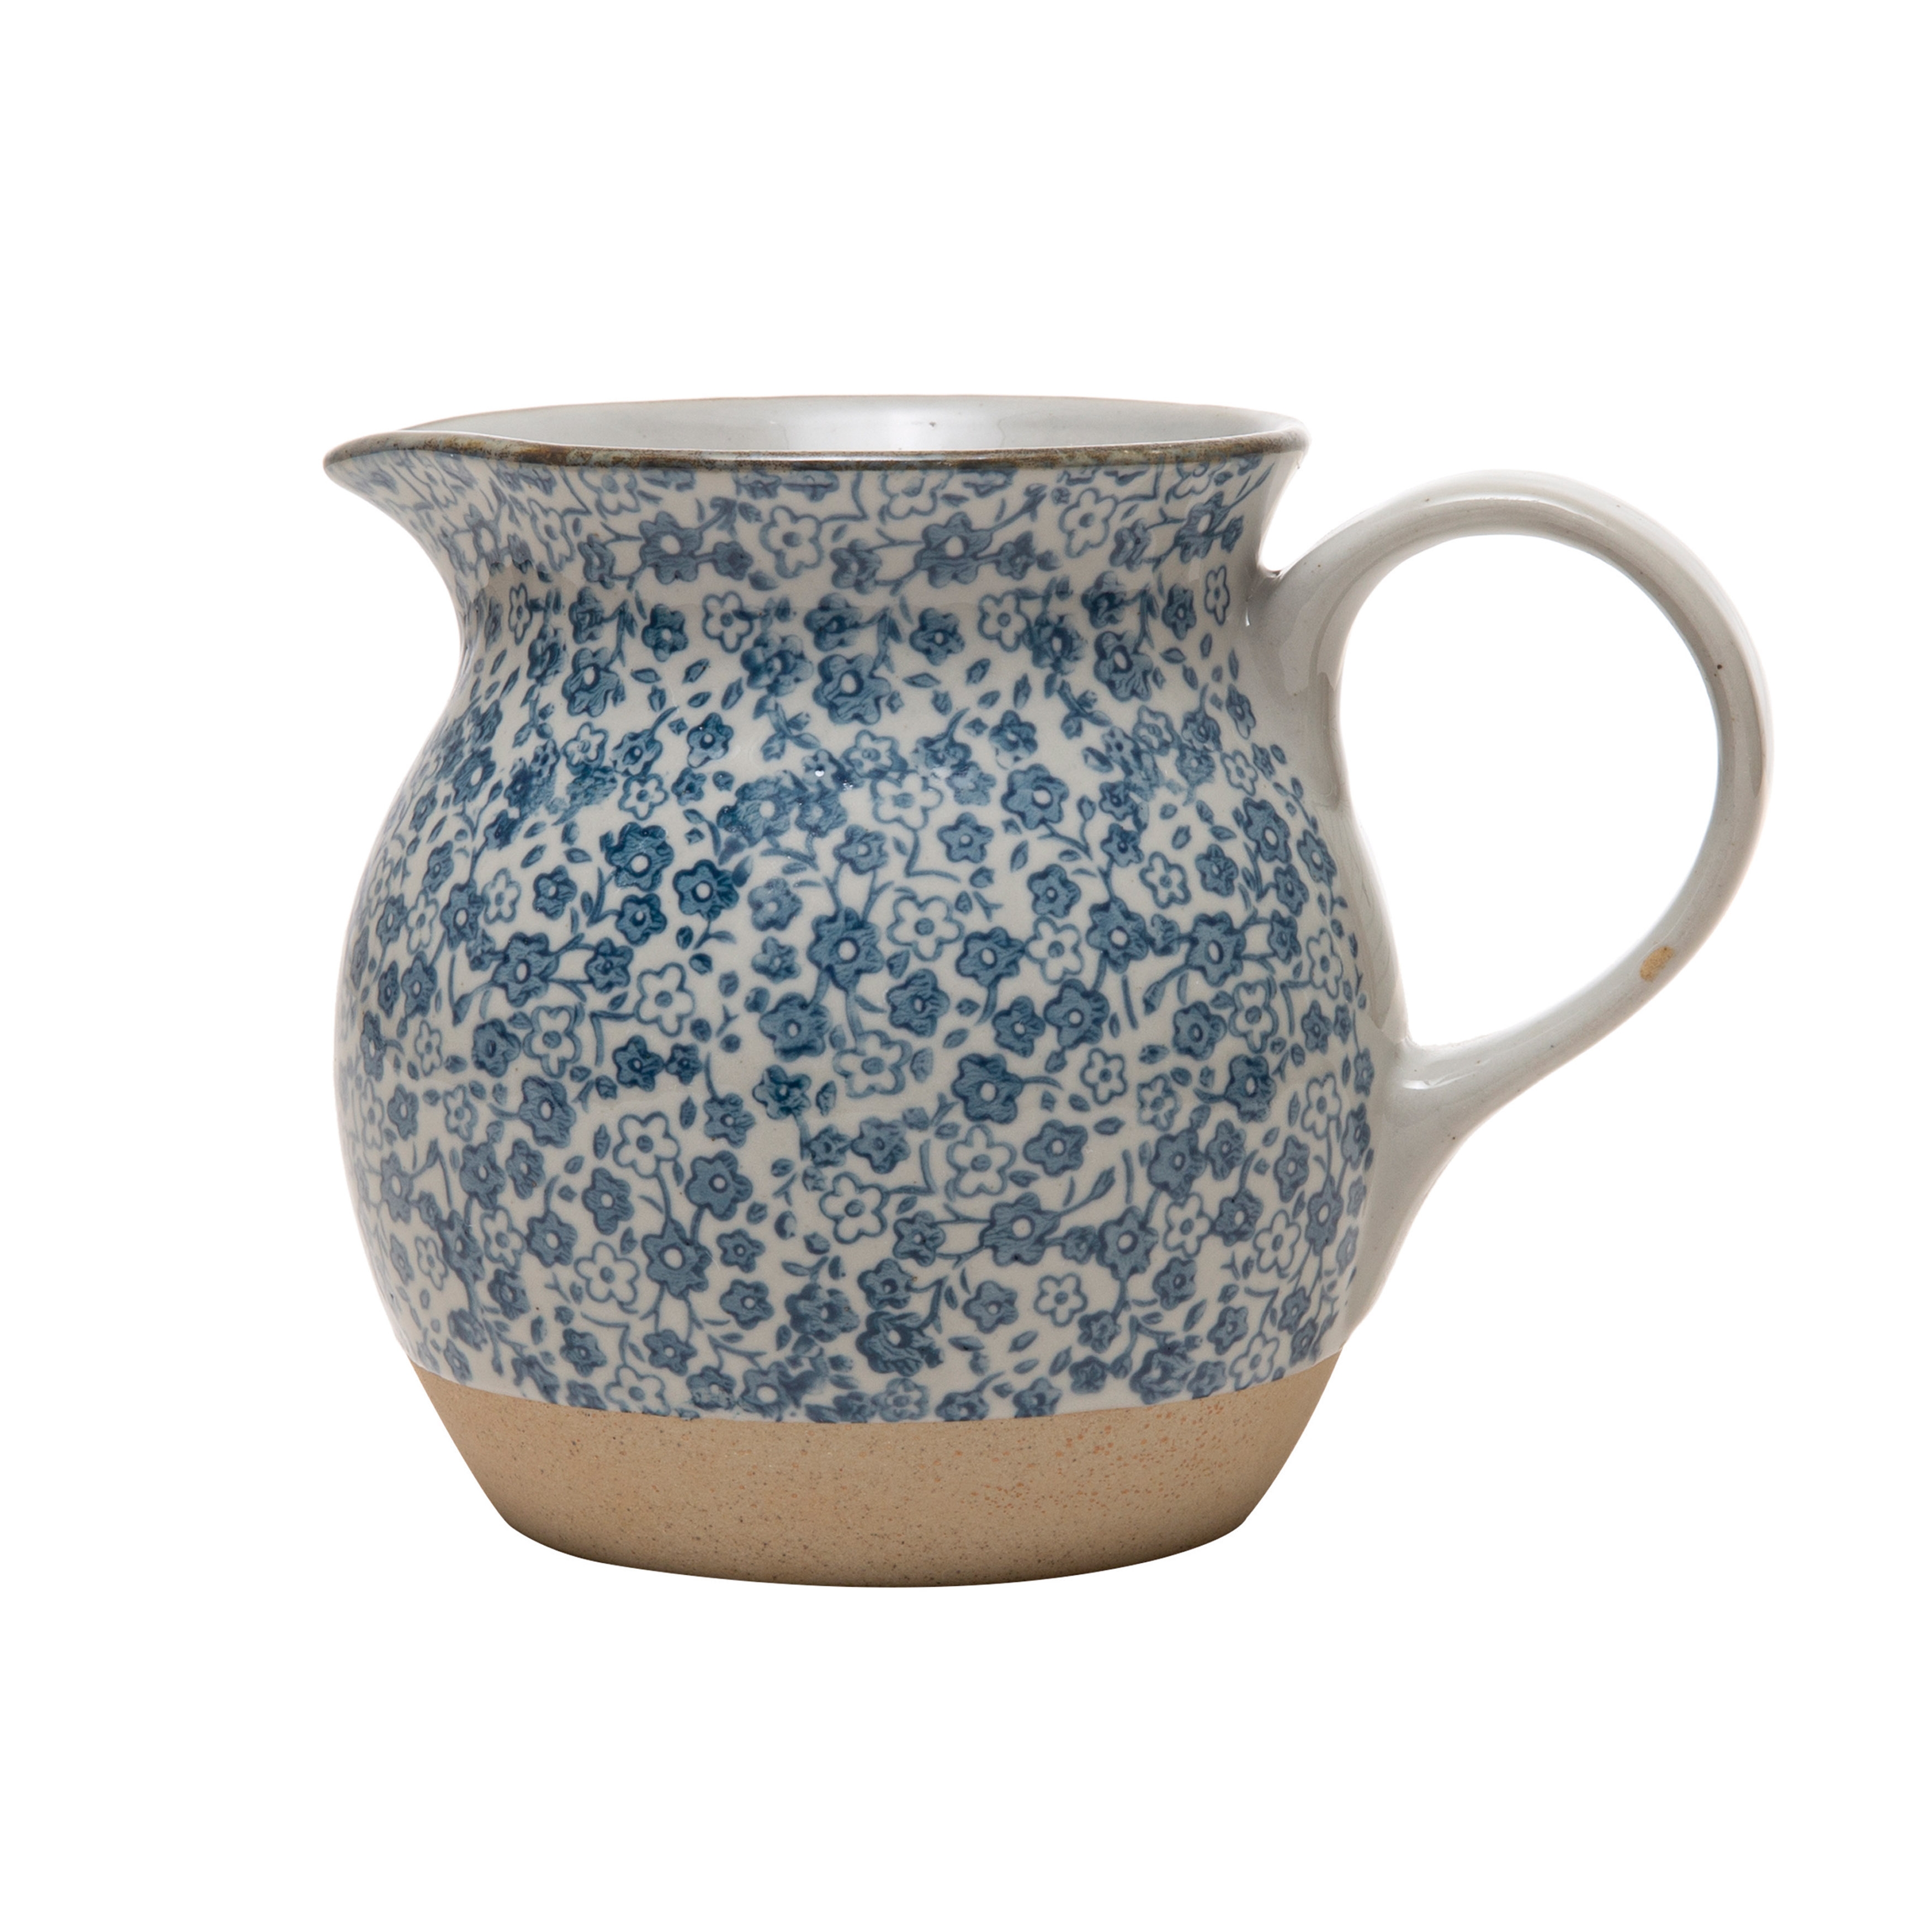 Hand-Painted Country-Style Stoneware Pitcher with Floral Print - Image 0